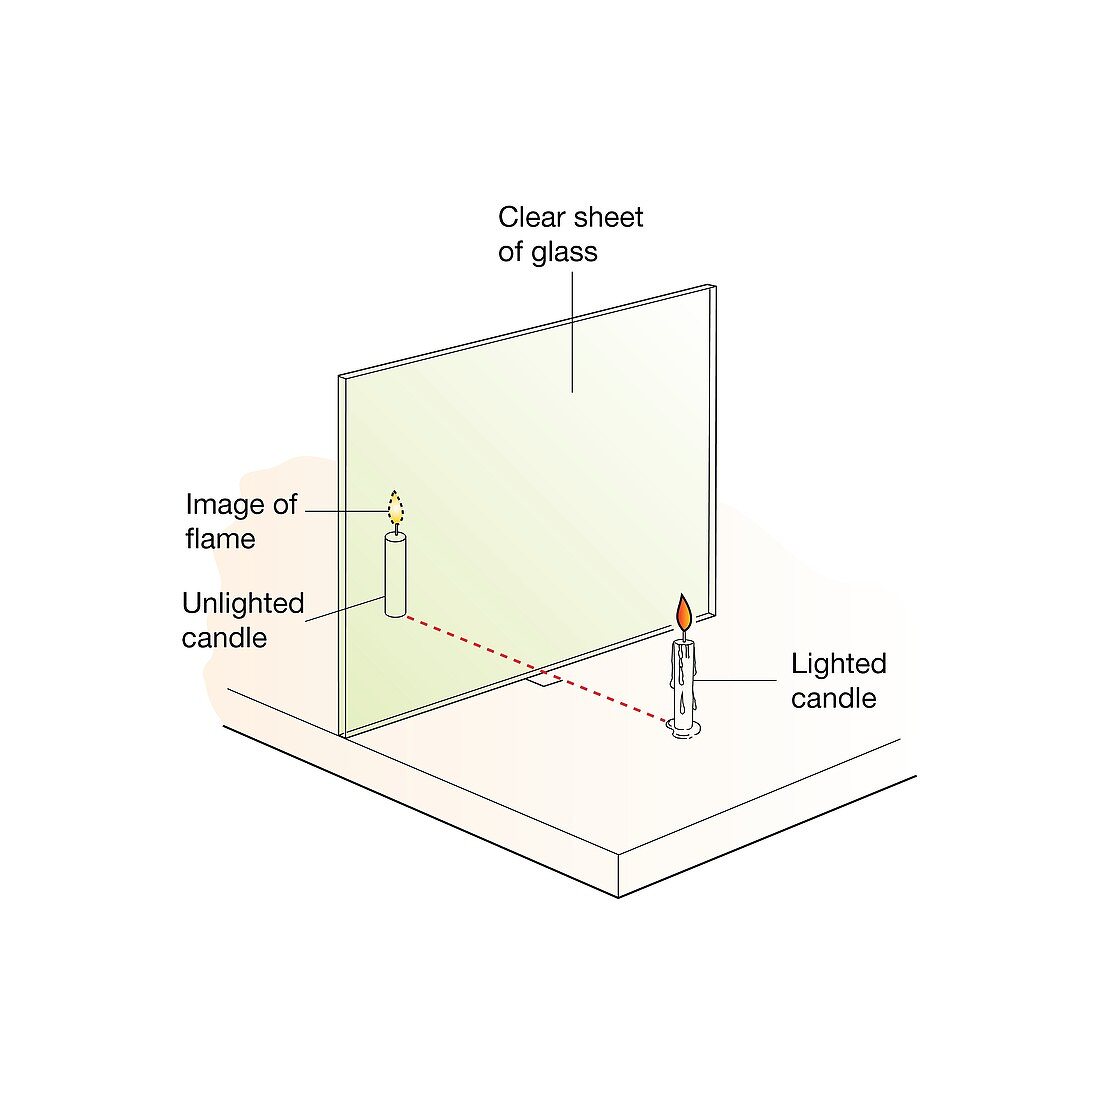 Image position in a plane mirror, illustration